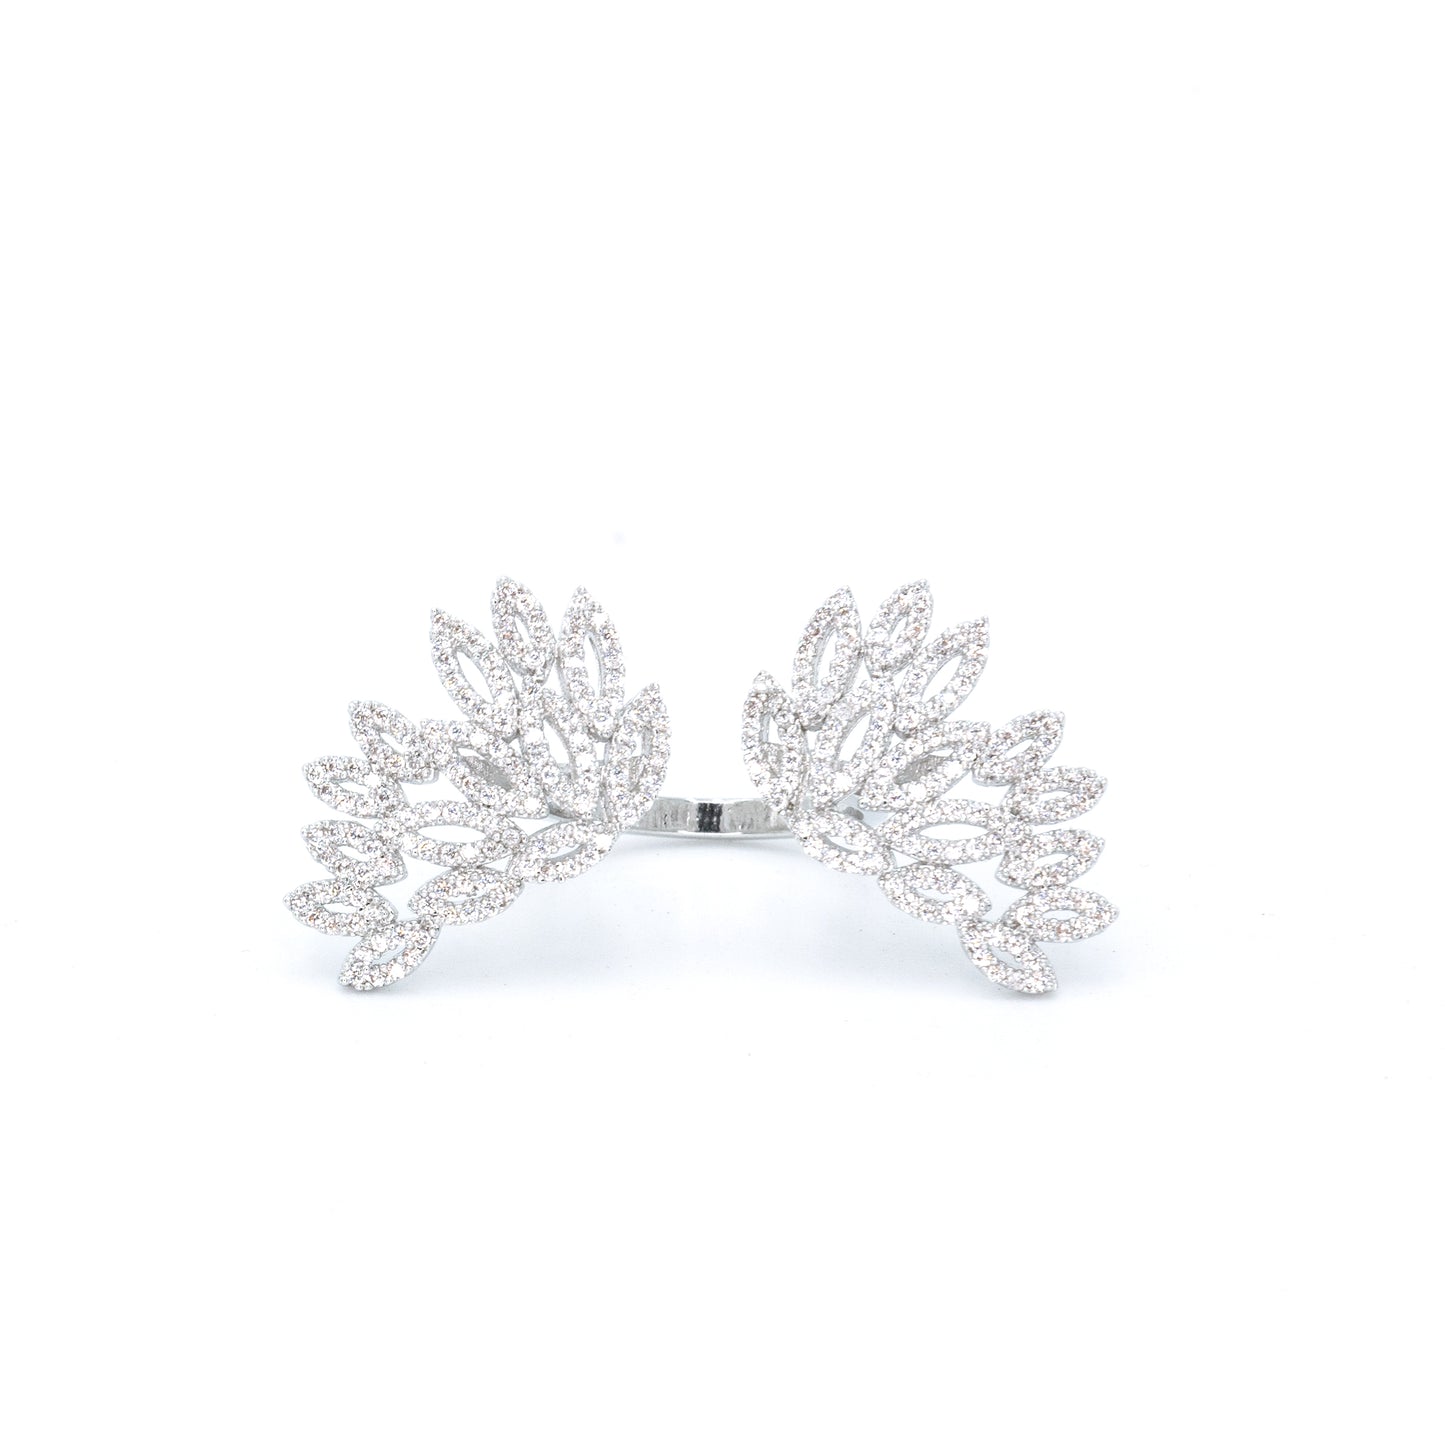 Wing adjustable ring